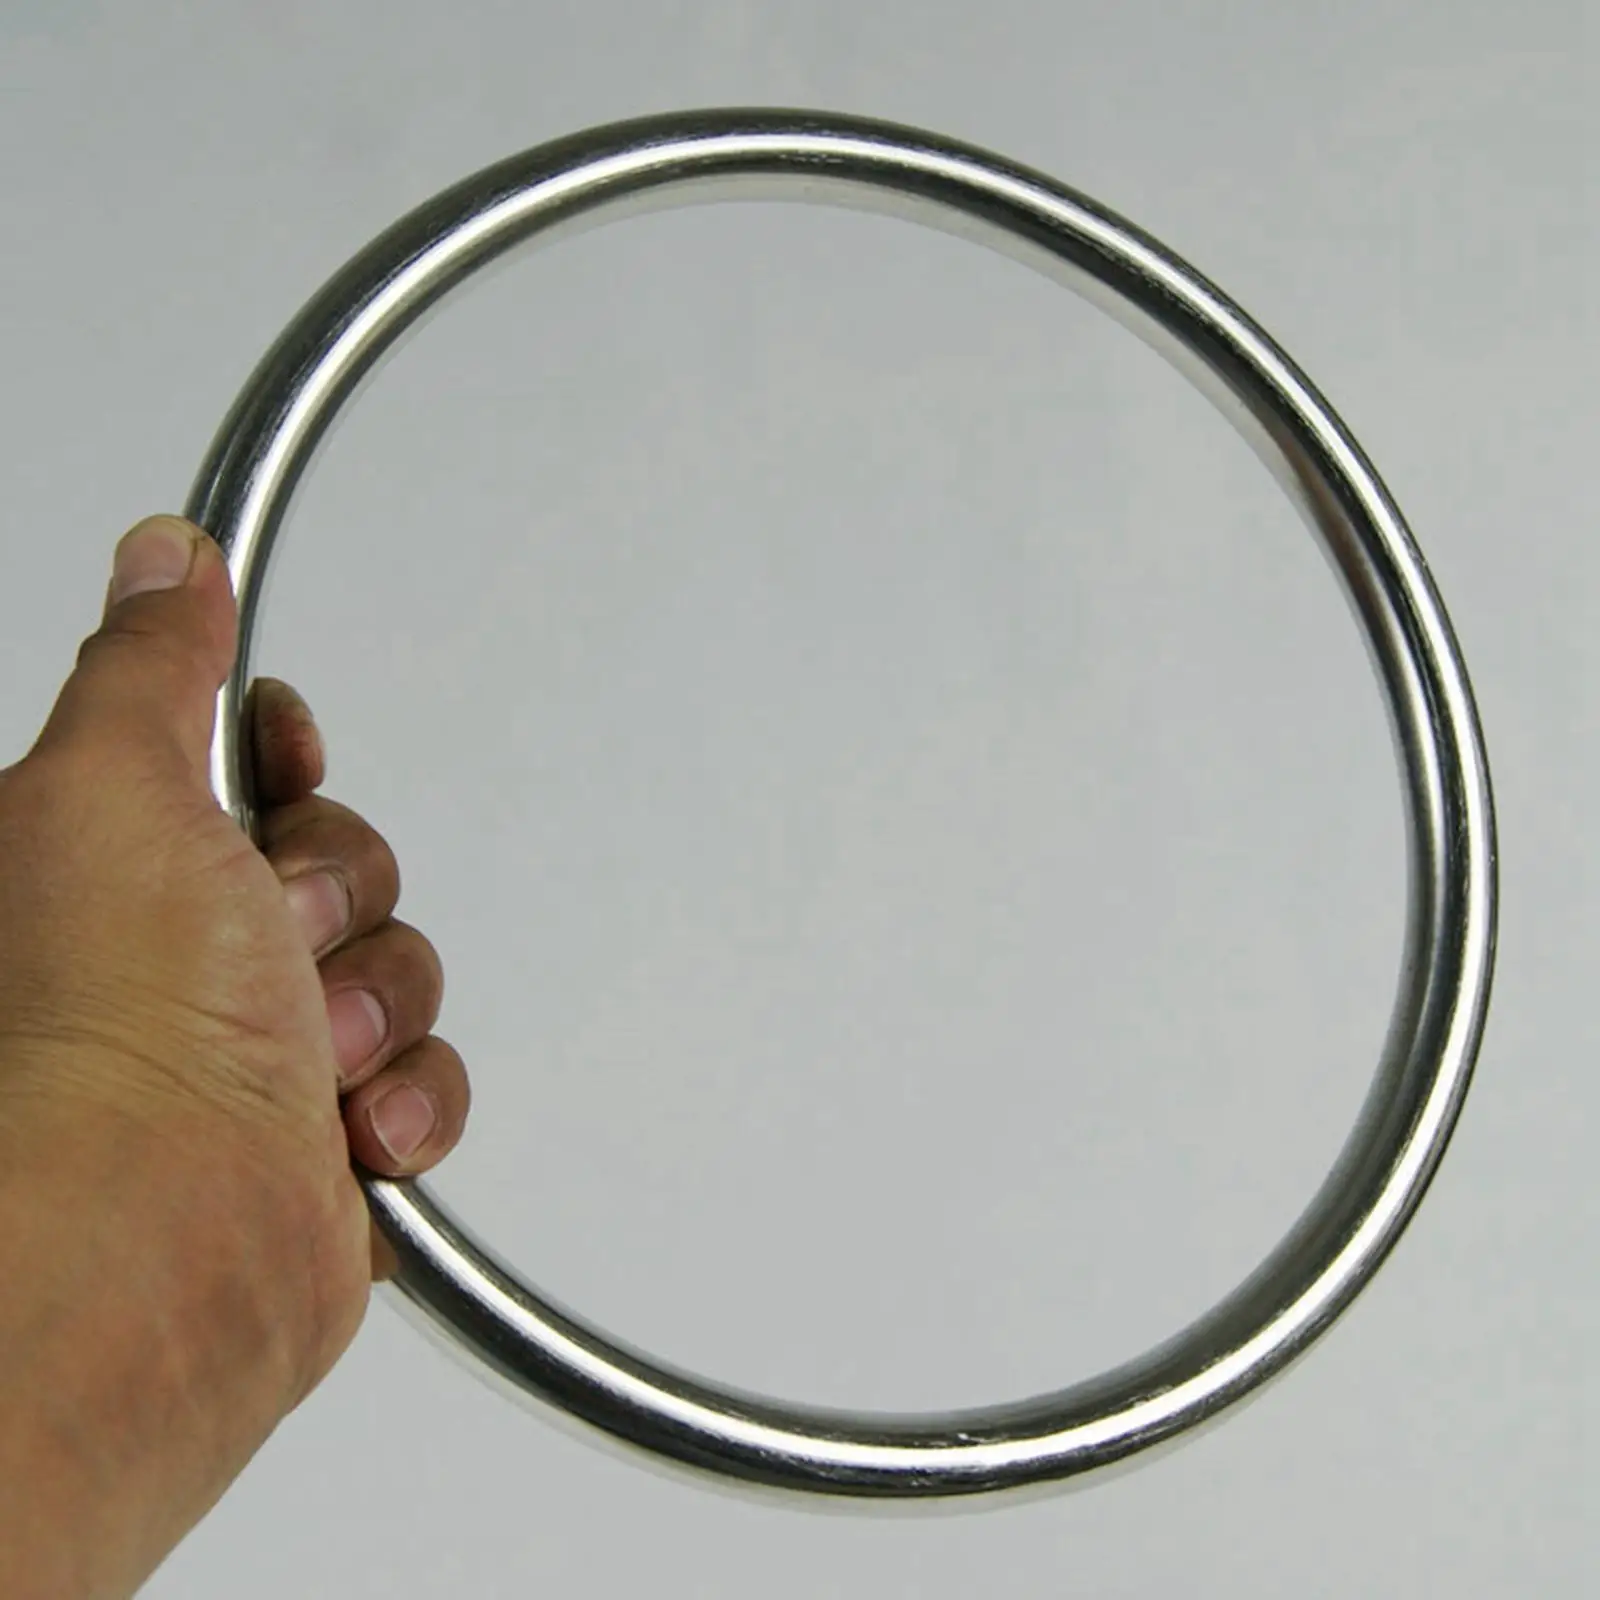 Stainless Steel Rattan Ring Durable Training Equipment Rings Sturdy Hoop Training Ring for Boxing Martial Arts